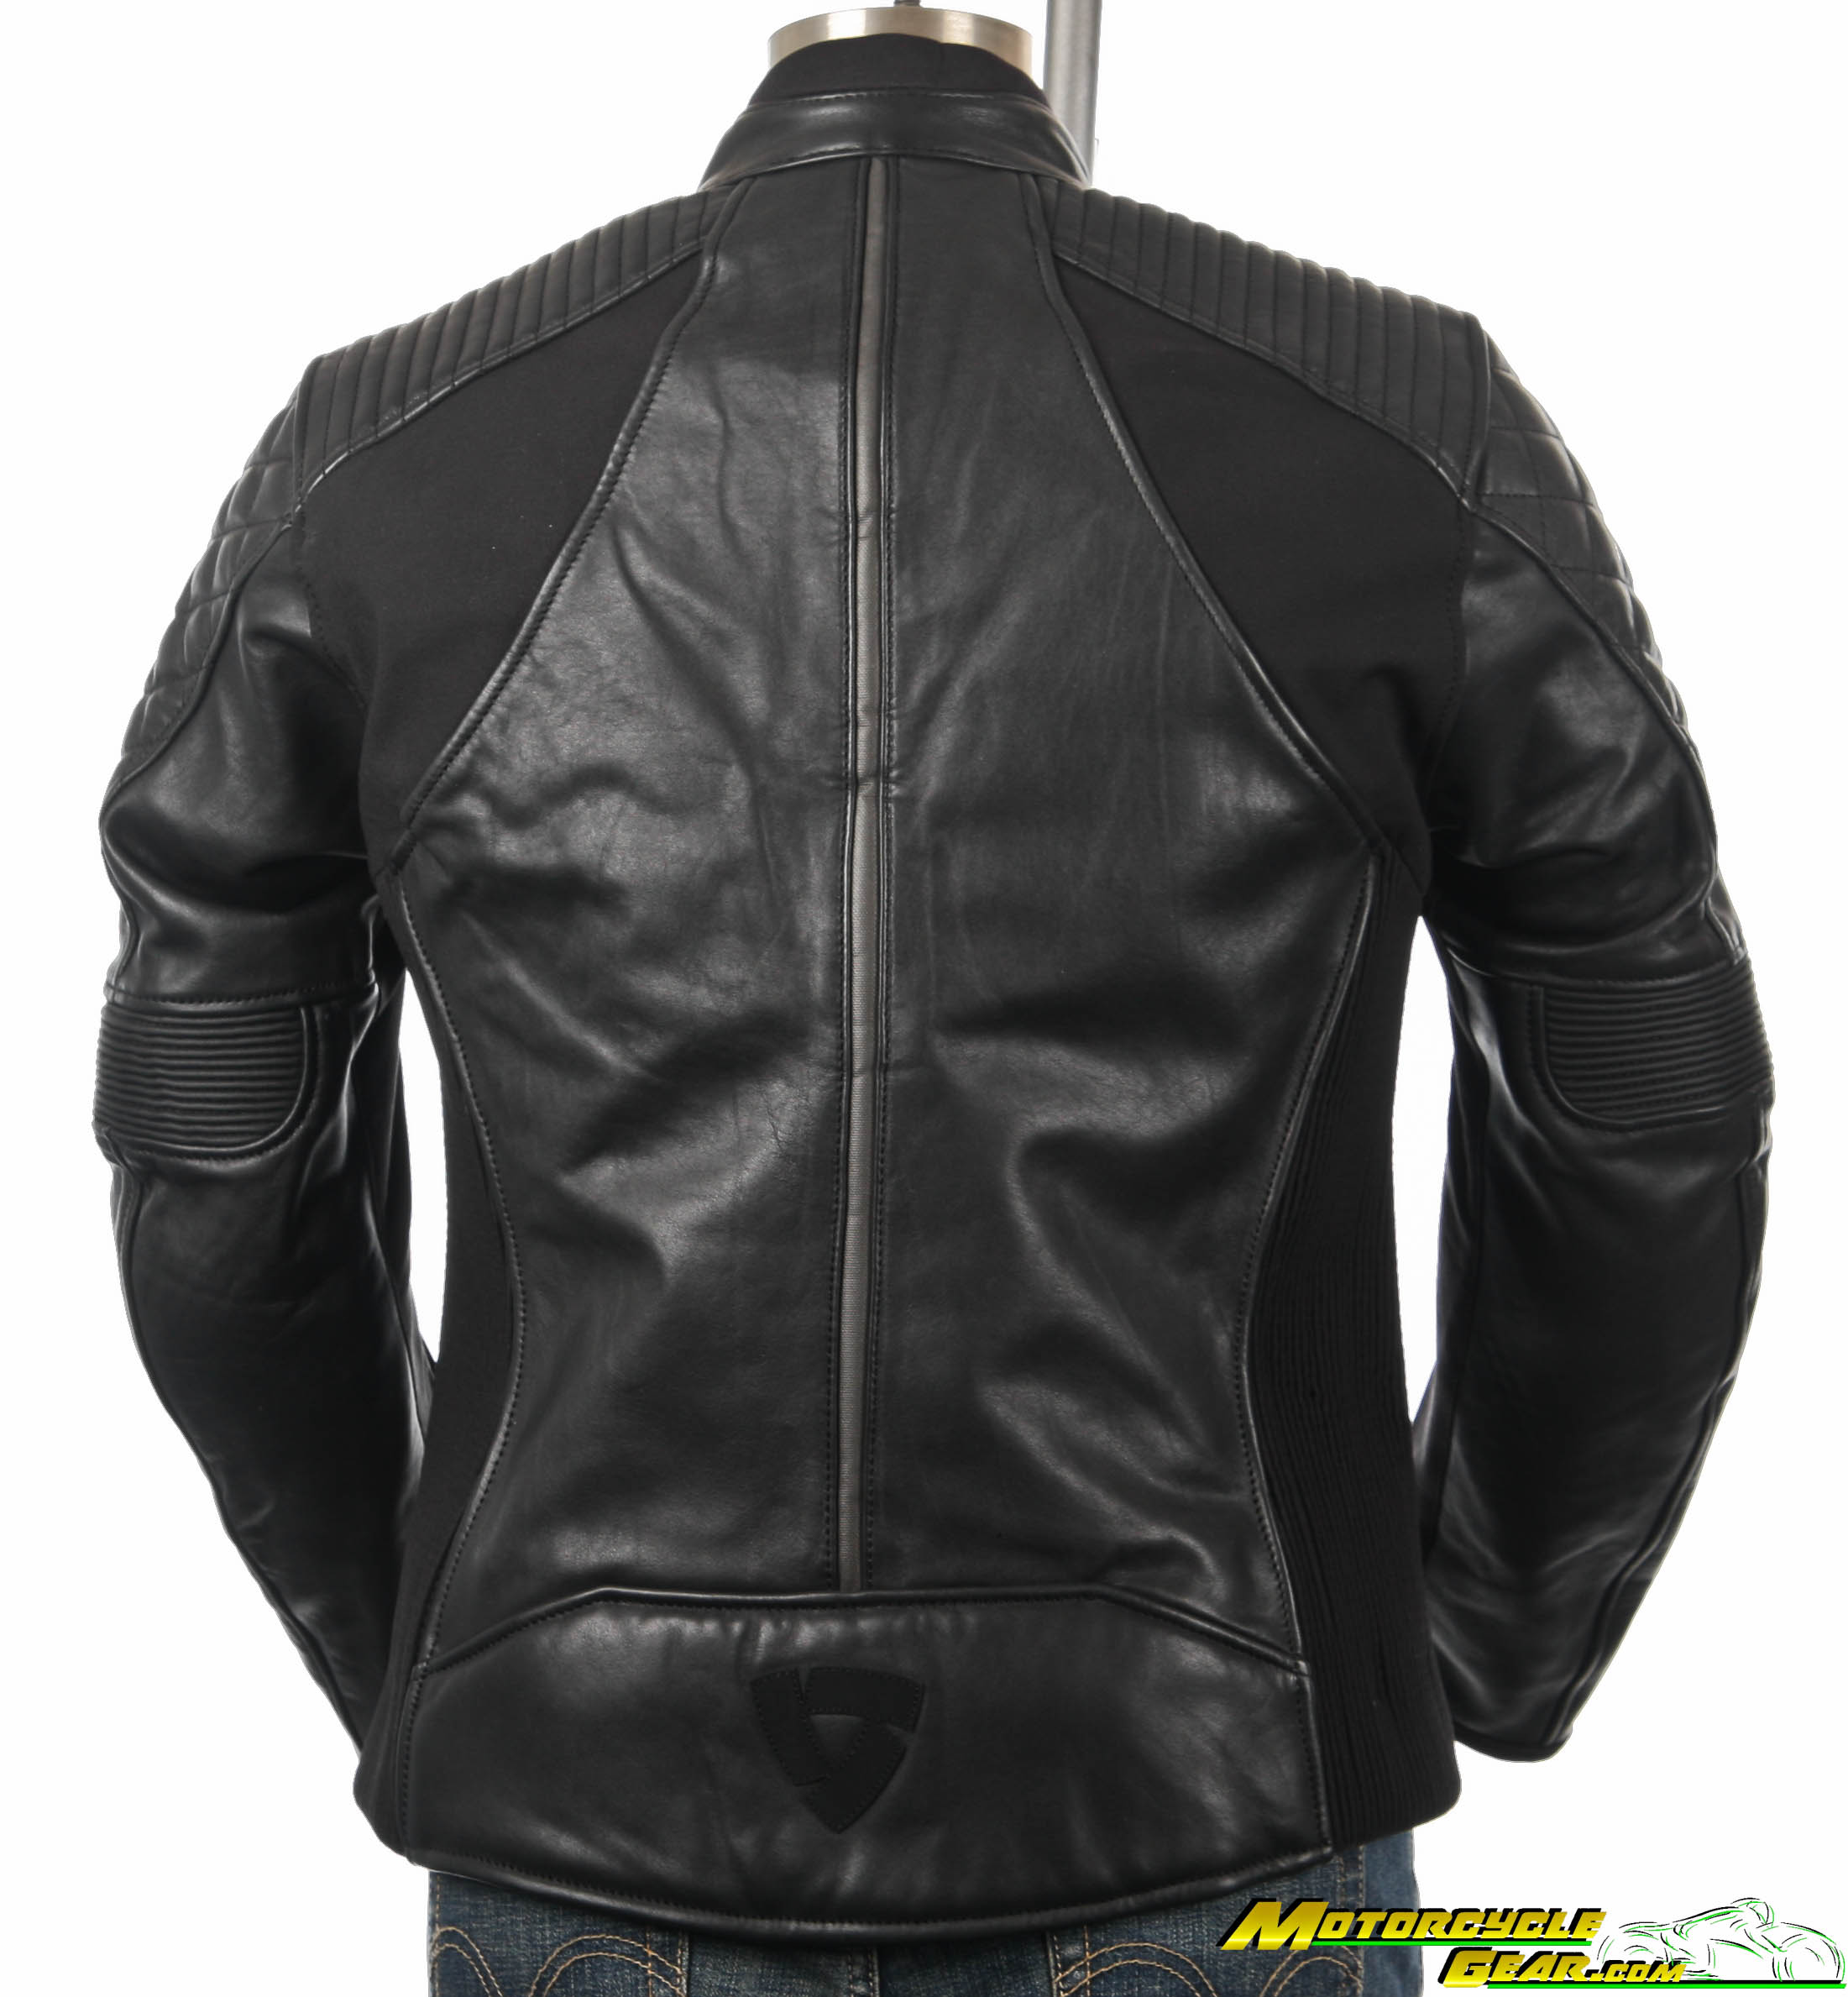 Viewing Images For REVIT Luna Jacket For Women :: MotorcycleGear.com